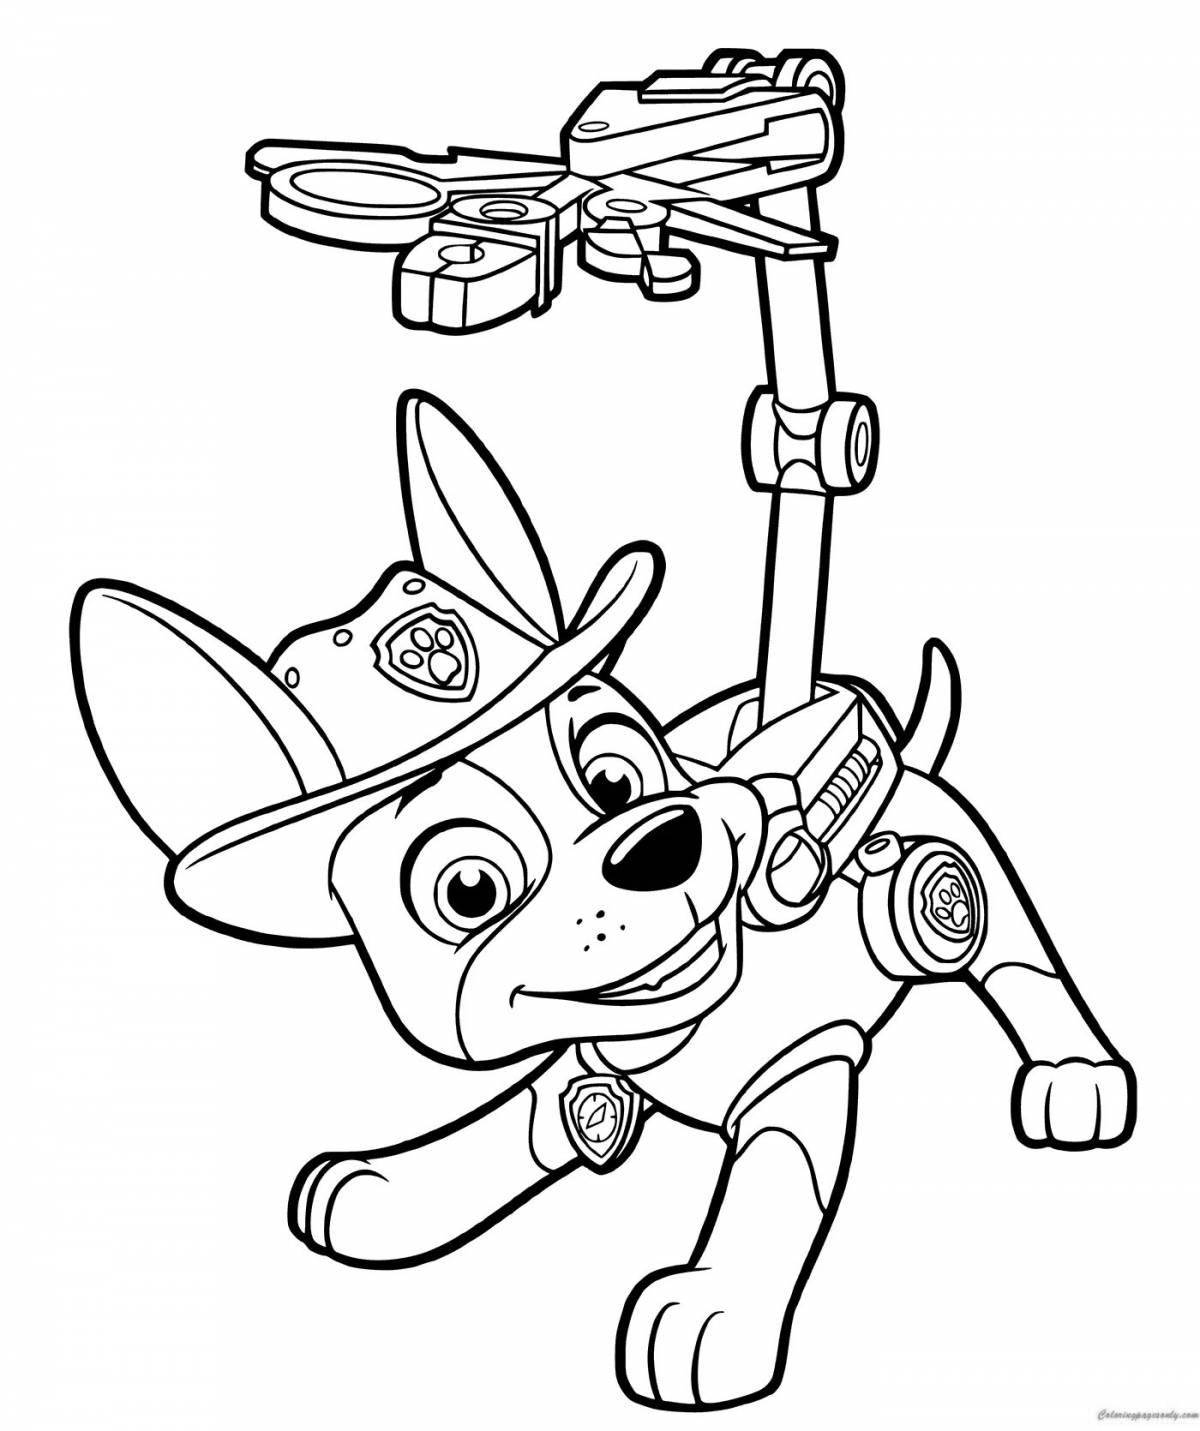 Paw patrol coloring book for kids 3 4